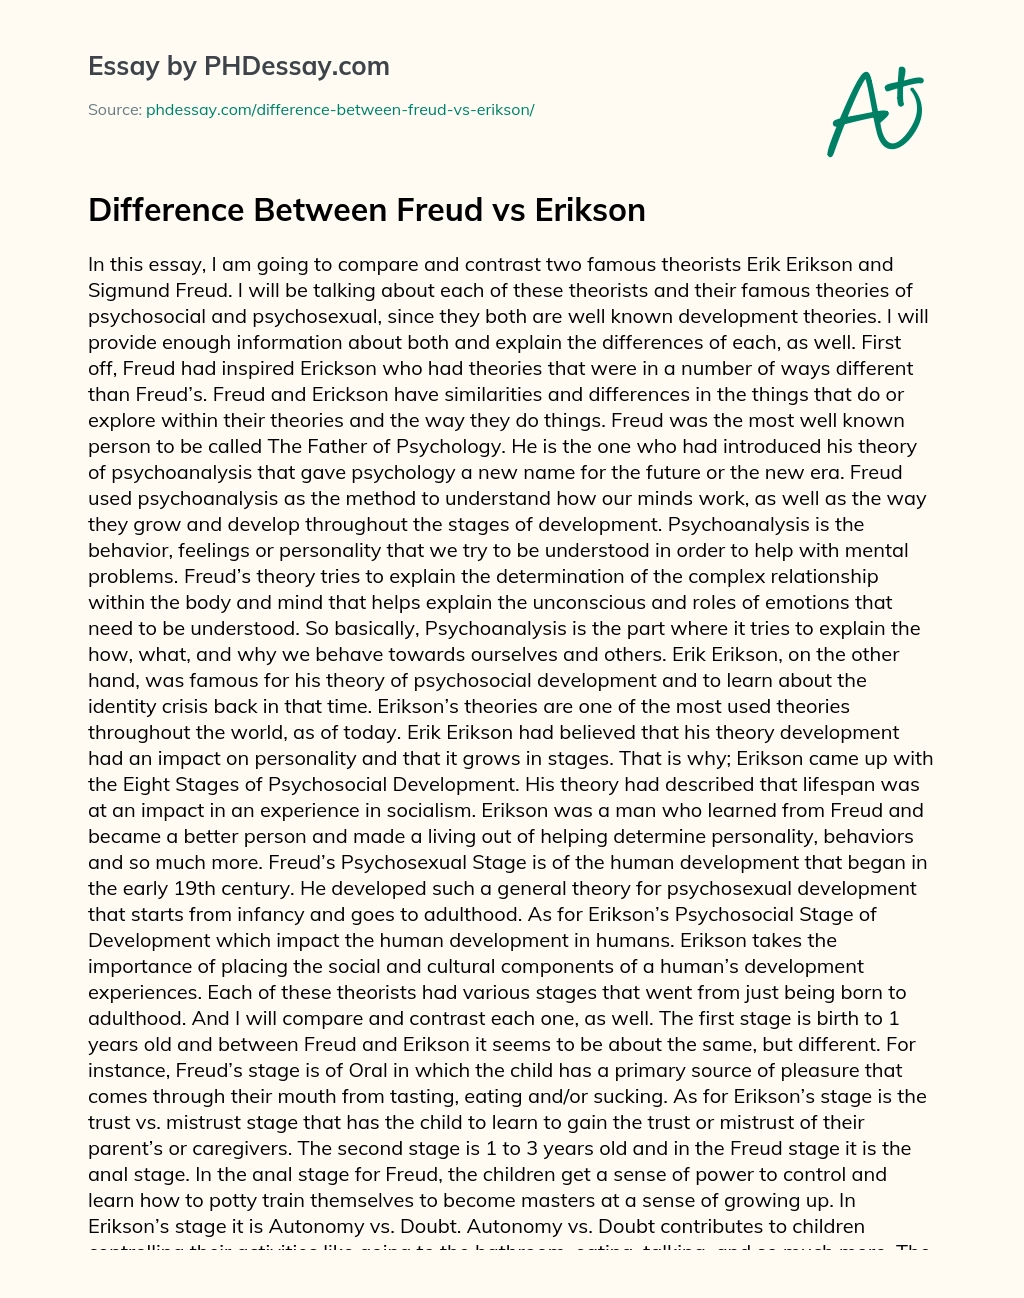 Difference Between Freud vs Erikson essay